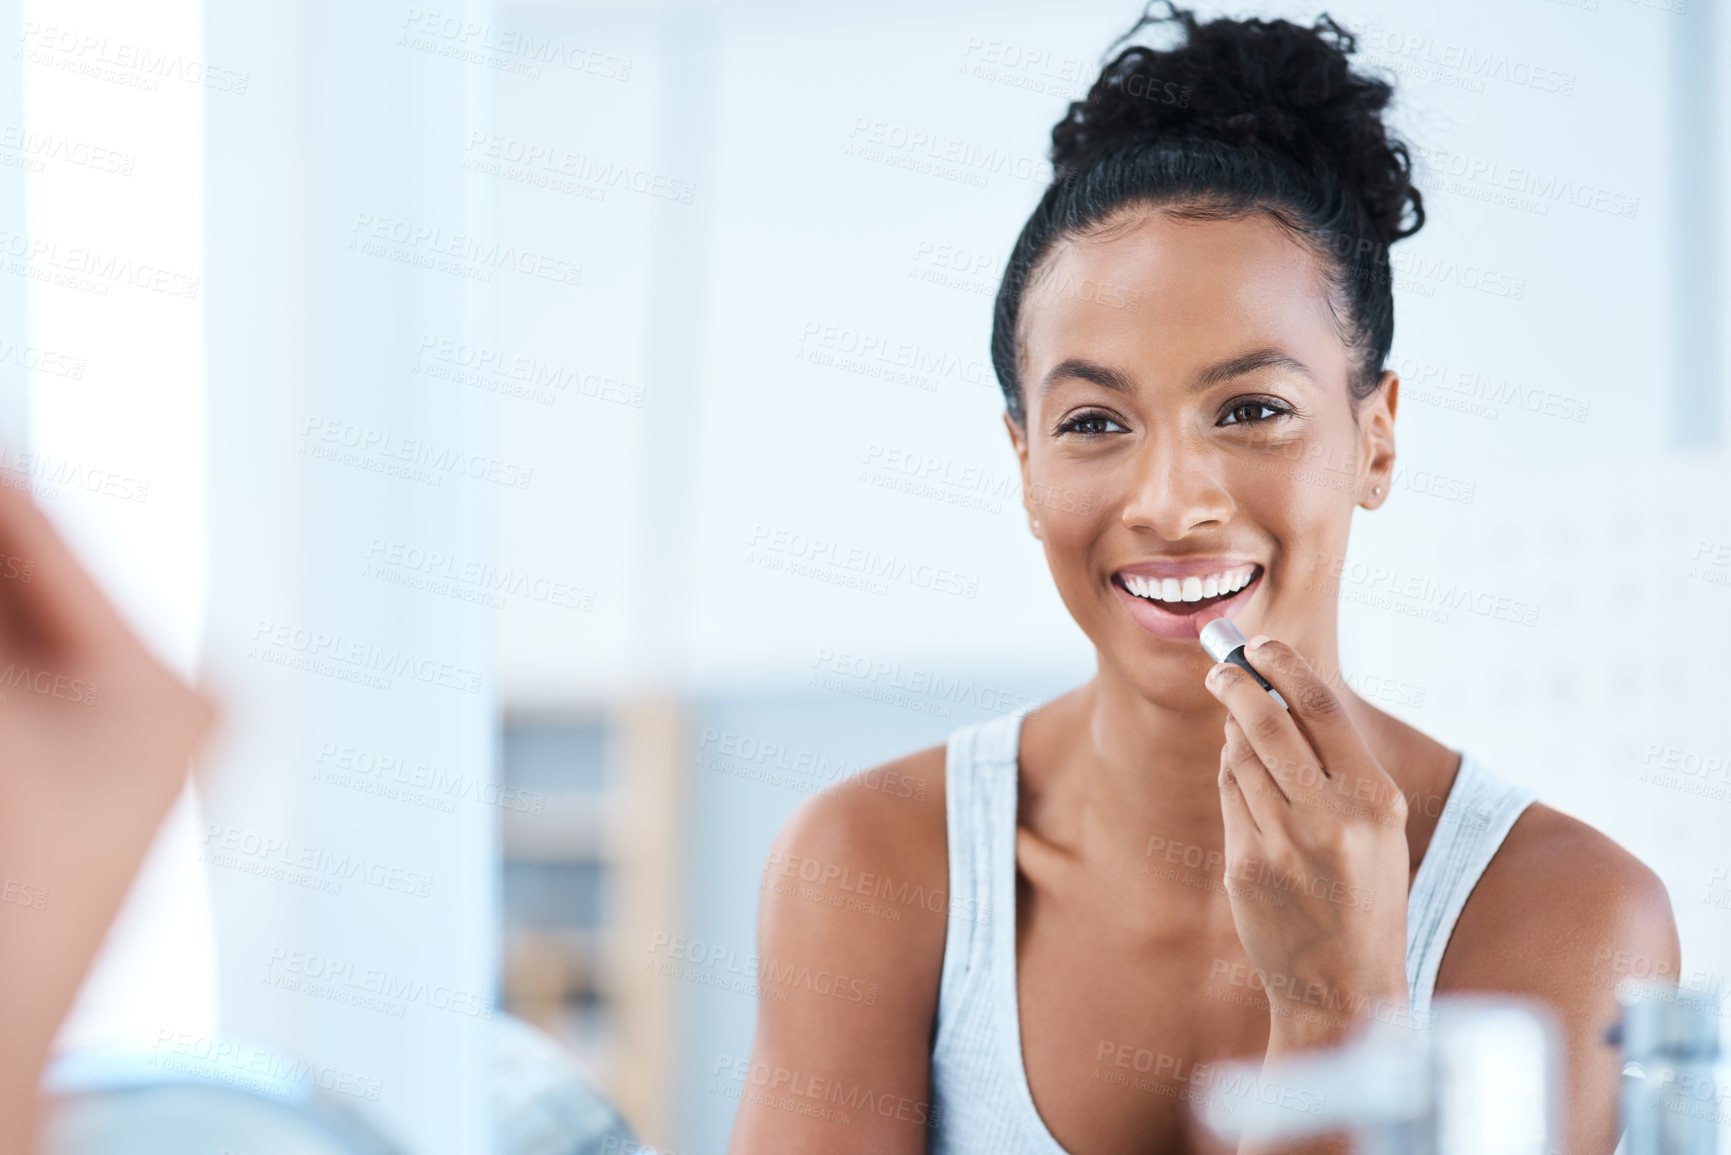 Buy stock photo Shot of a young woman applying lipstick in her bathroom mirror